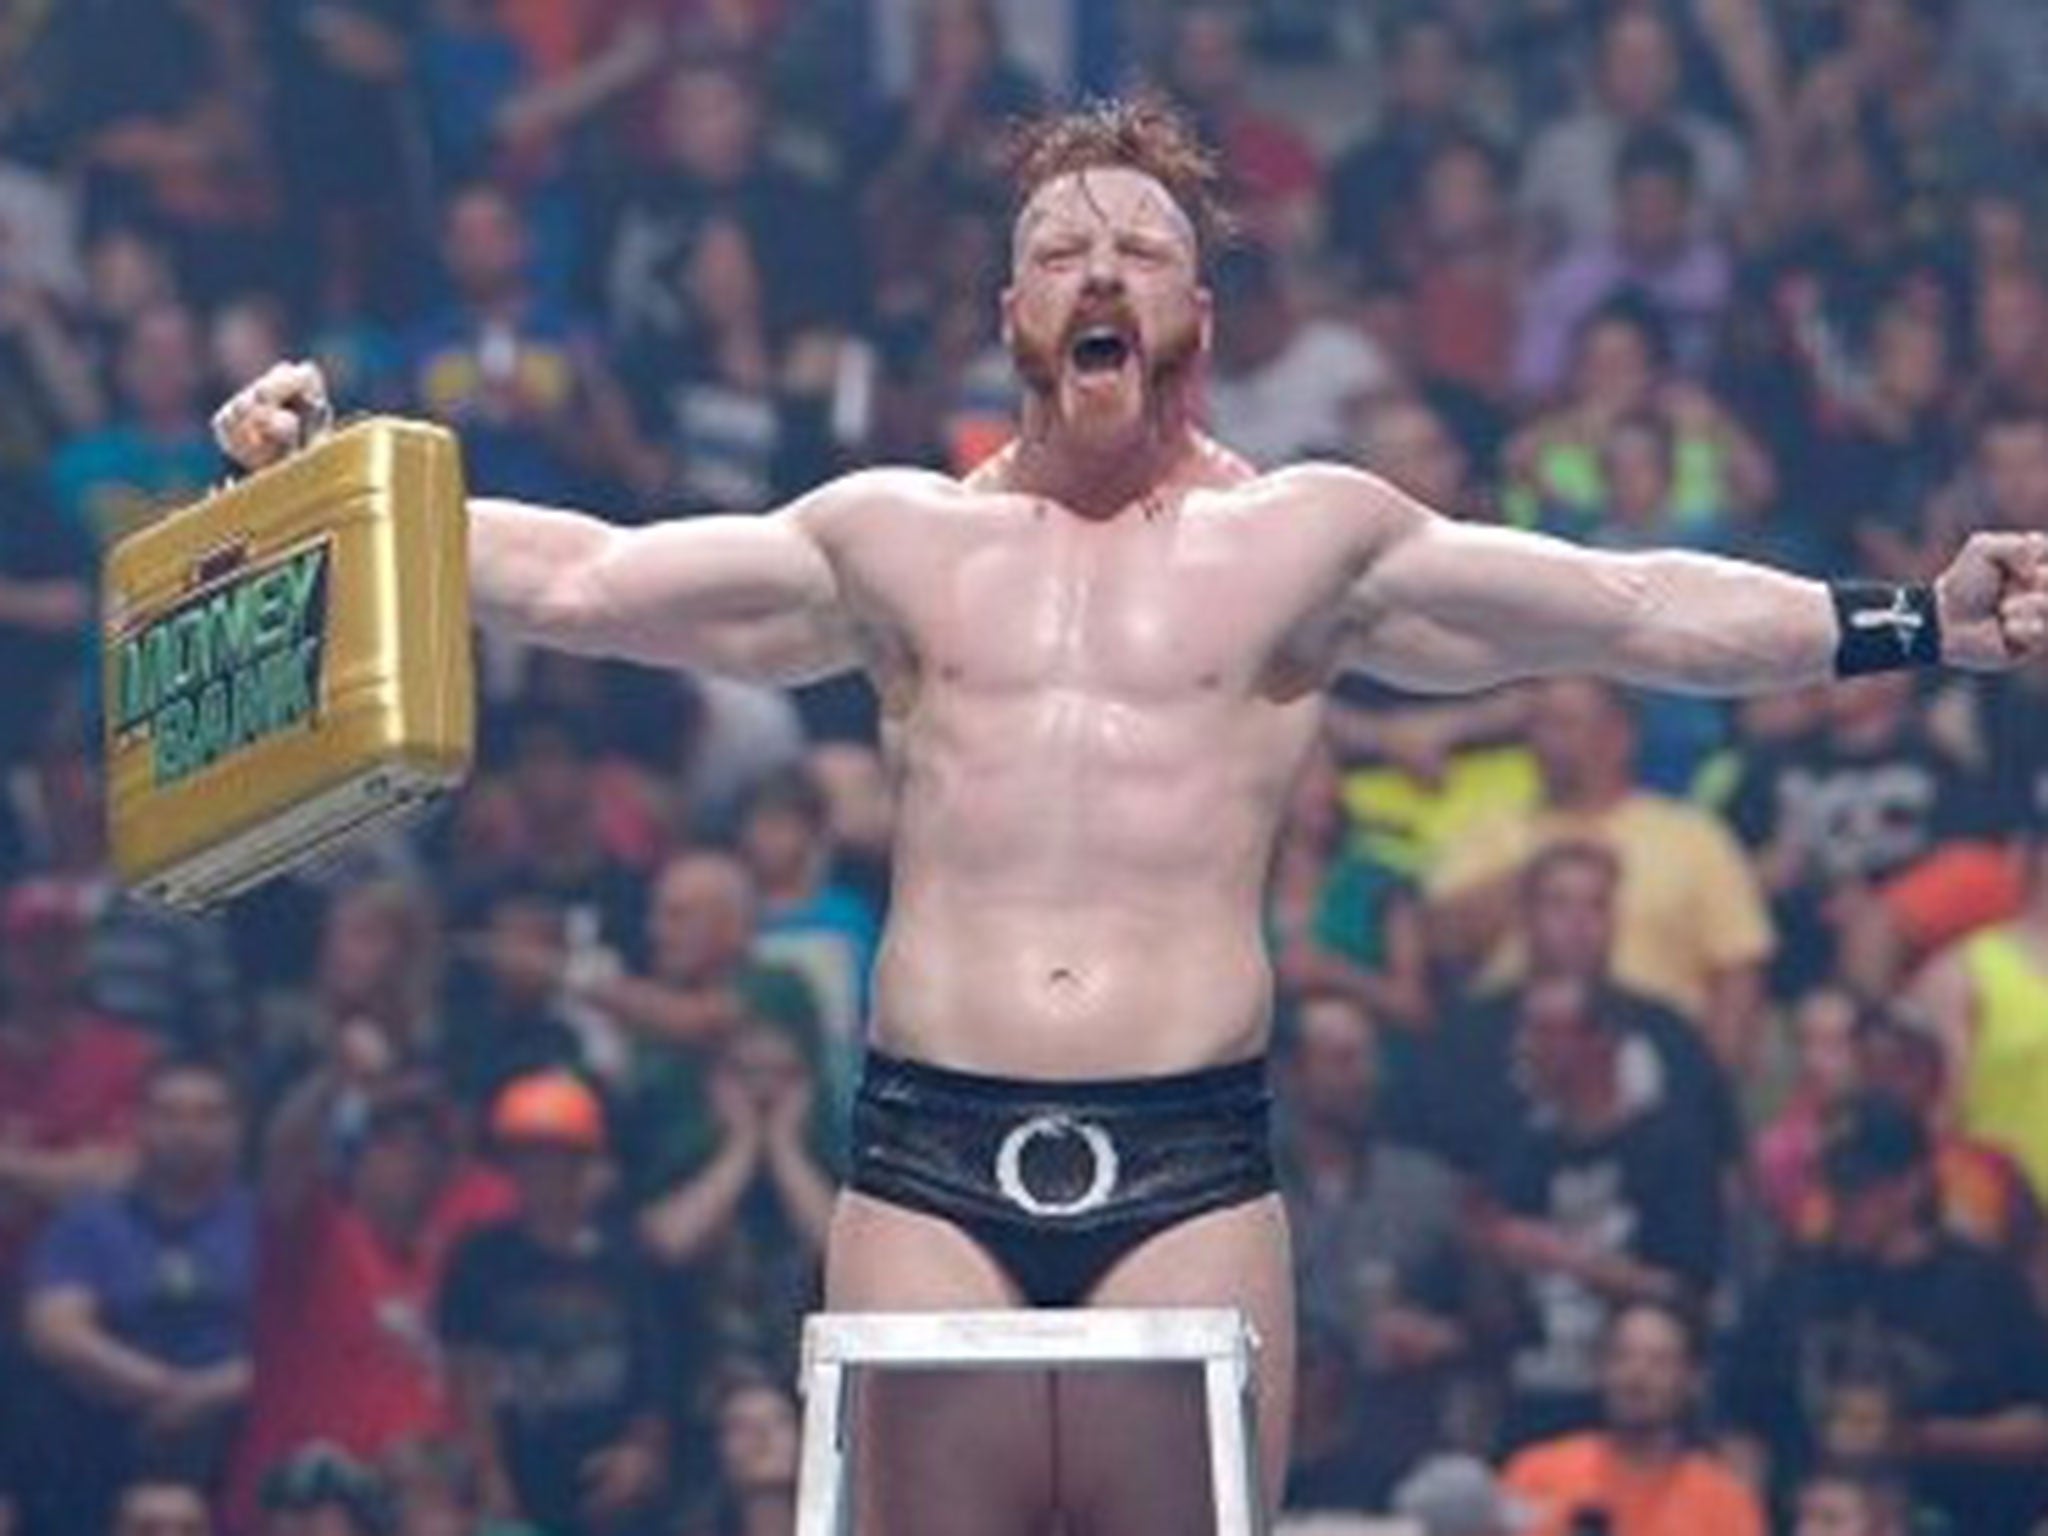 Sheamus celebrates on top of the ladder